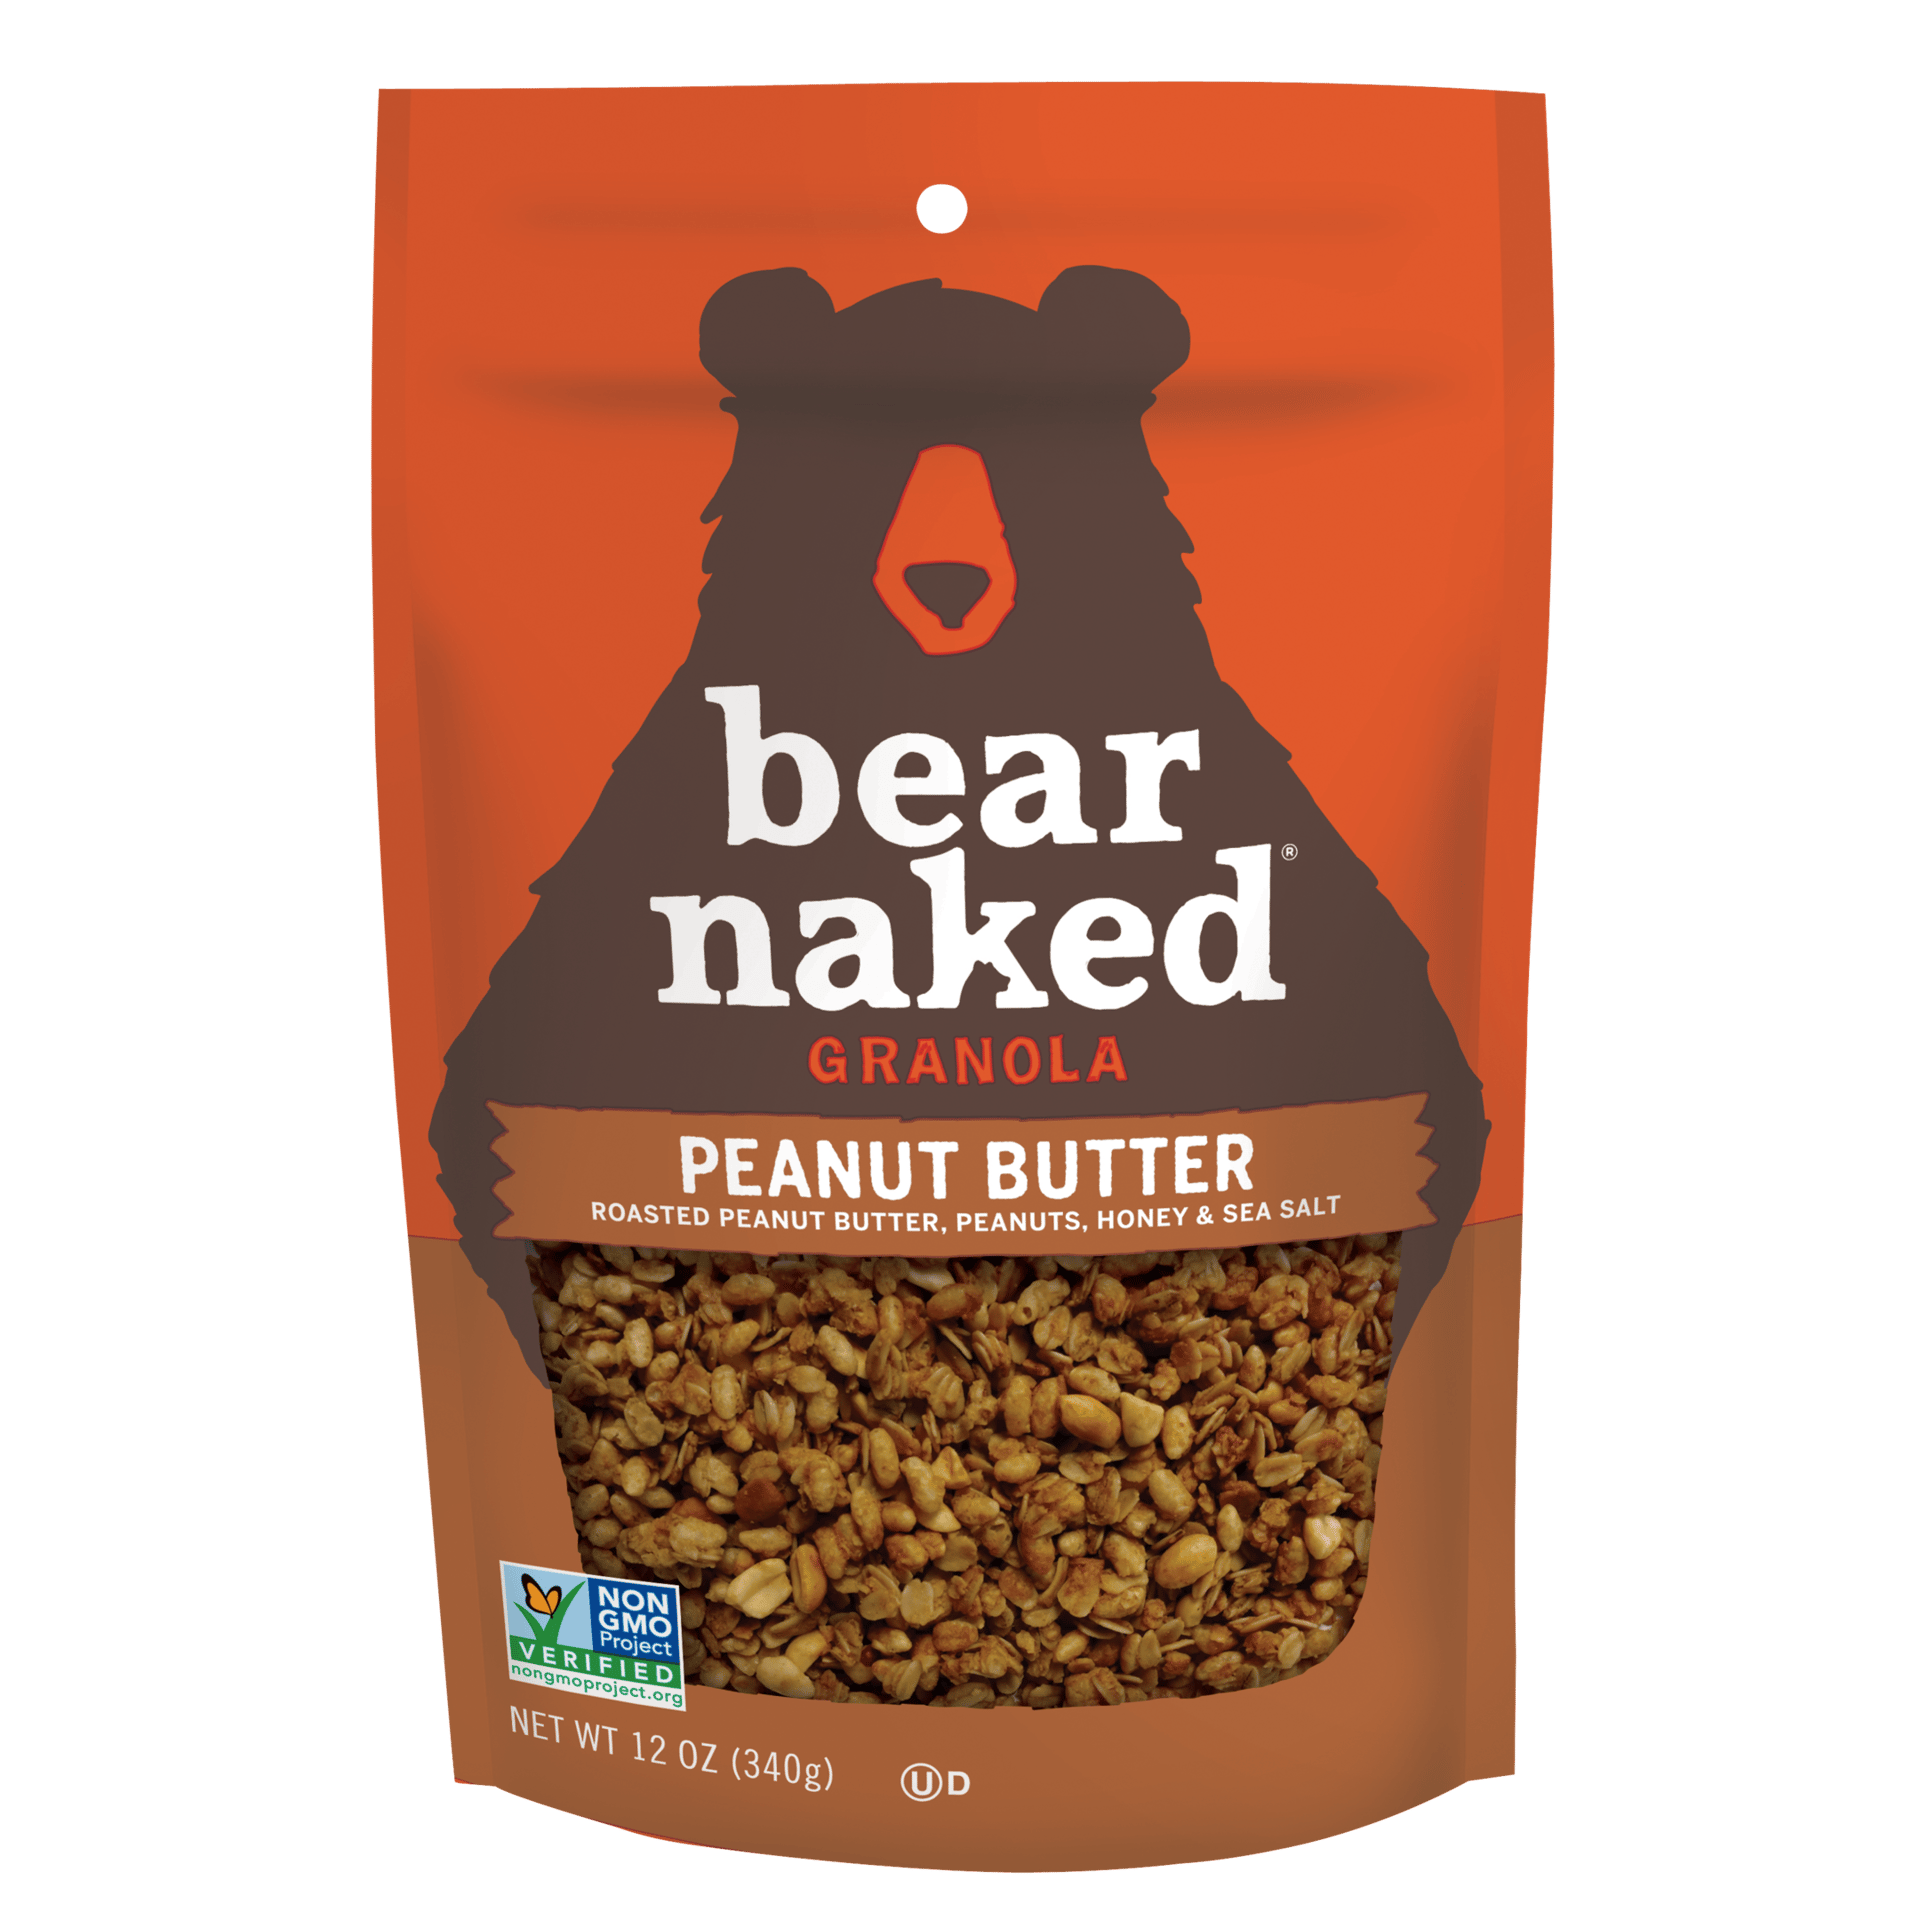 Packaging and labeling, Brown, Orange, Bear, Granola, Stand-up pouch